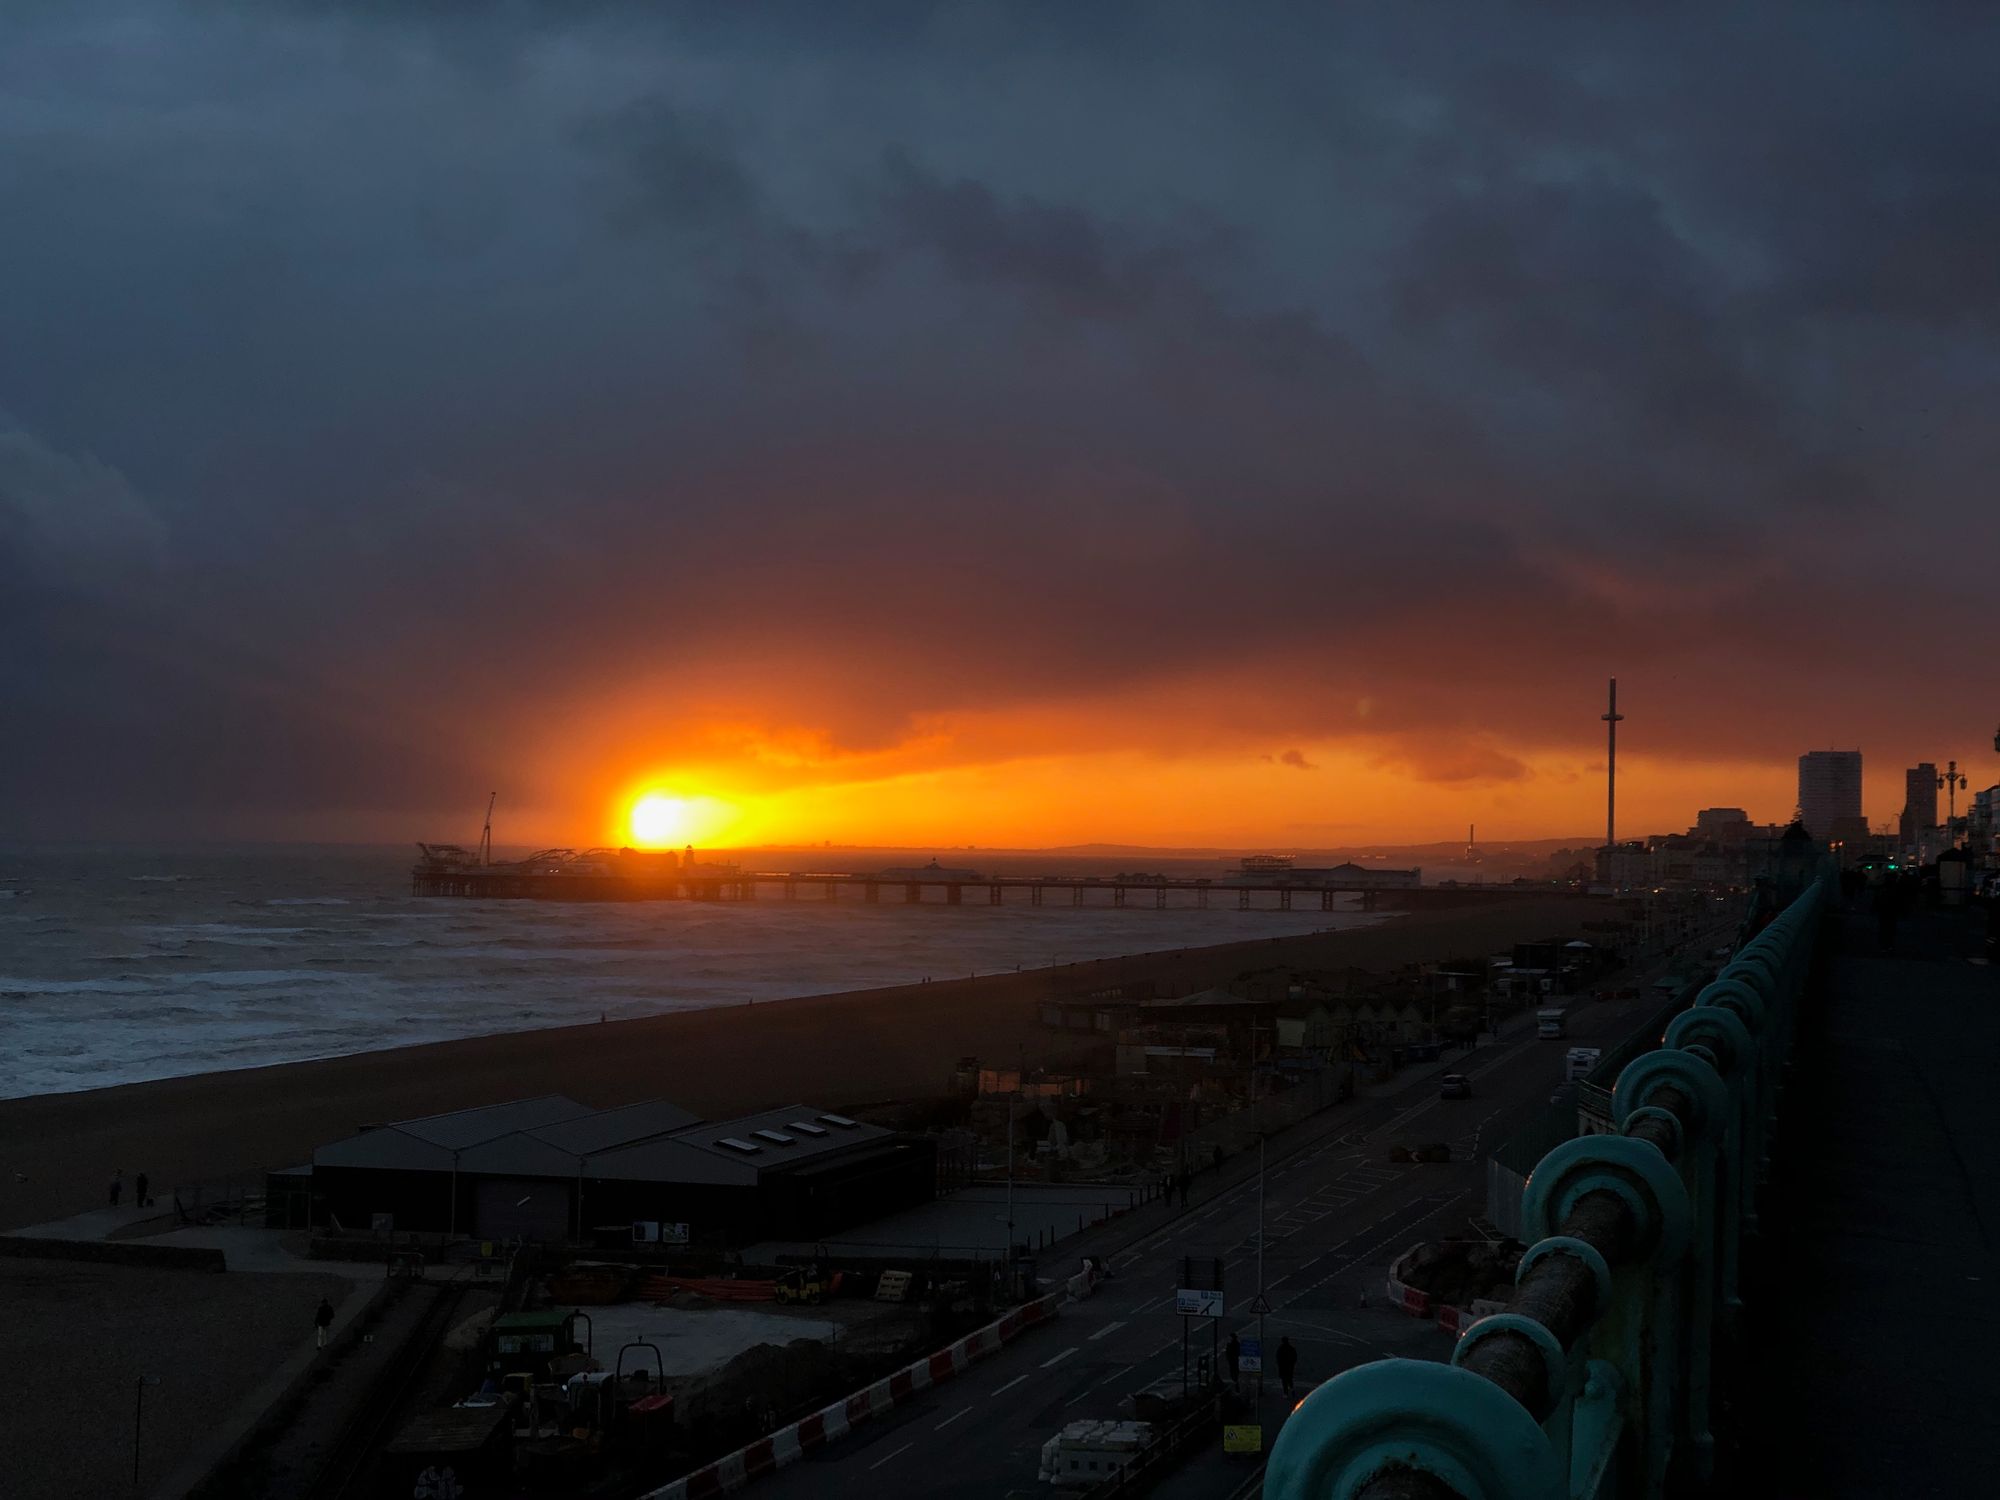 A photo of the pier as taken from Marine Parade. The sunset is bright orange, lighting a horizontal stretch of sky.